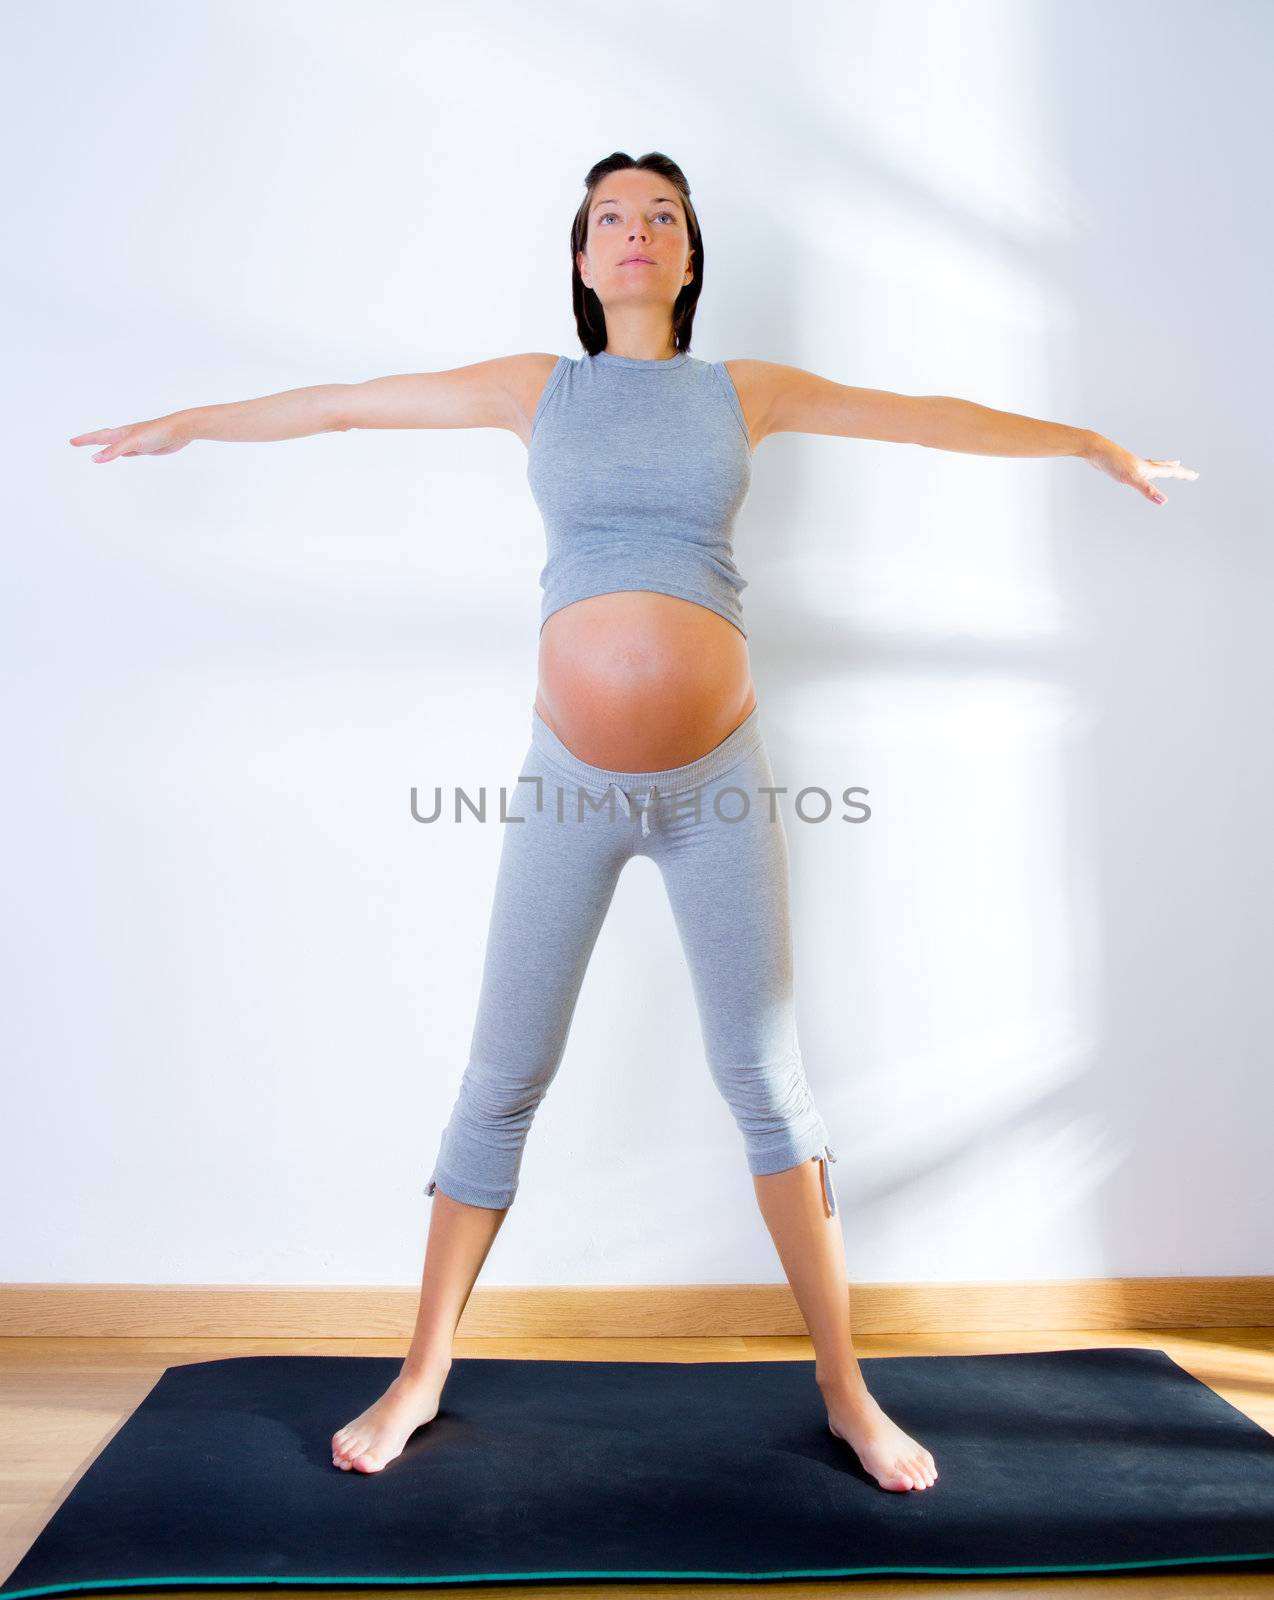 Beautiful pregnant woman at gym fitness exercise practicing aerobics on mat